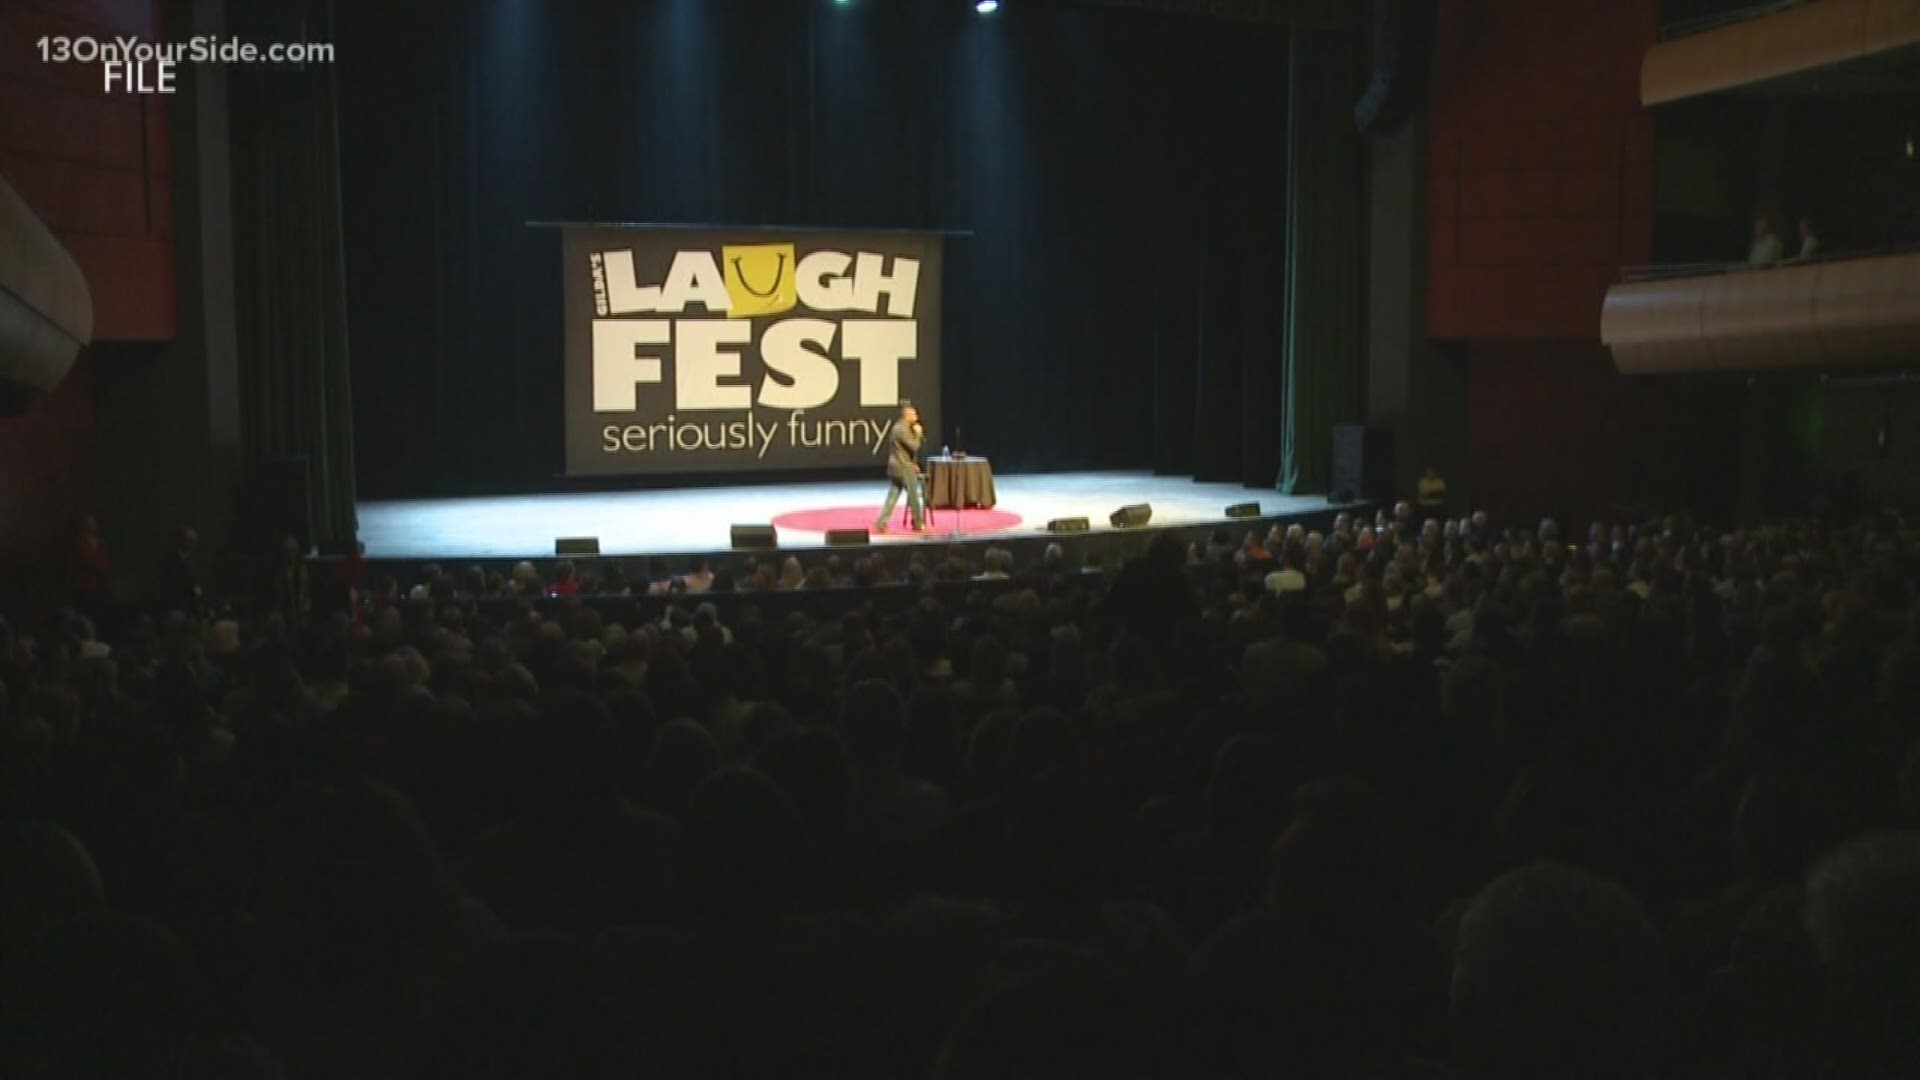 Joanne Roehm from LaughFest joined My West Michigan Tuesday, March 10 with a look at what shows and events to check out this week.